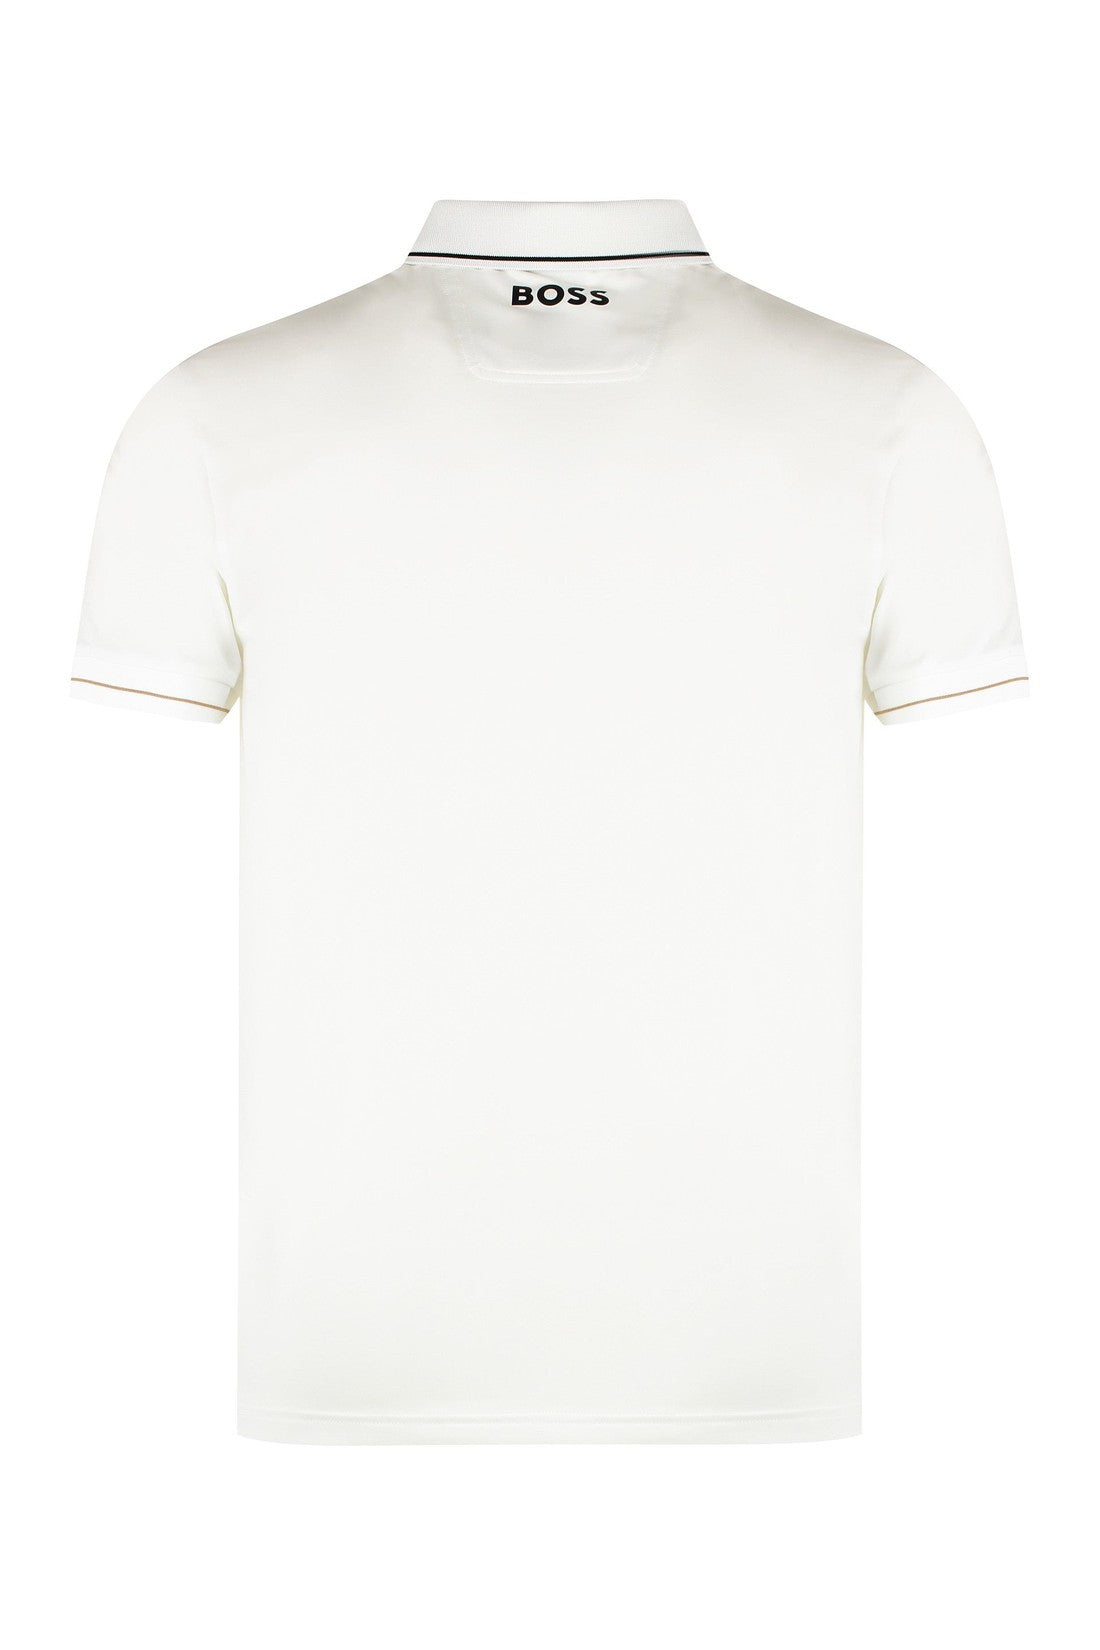 BOSS-OUTLET-SALE-Technical fabric polo shirt-ARCHIVIST